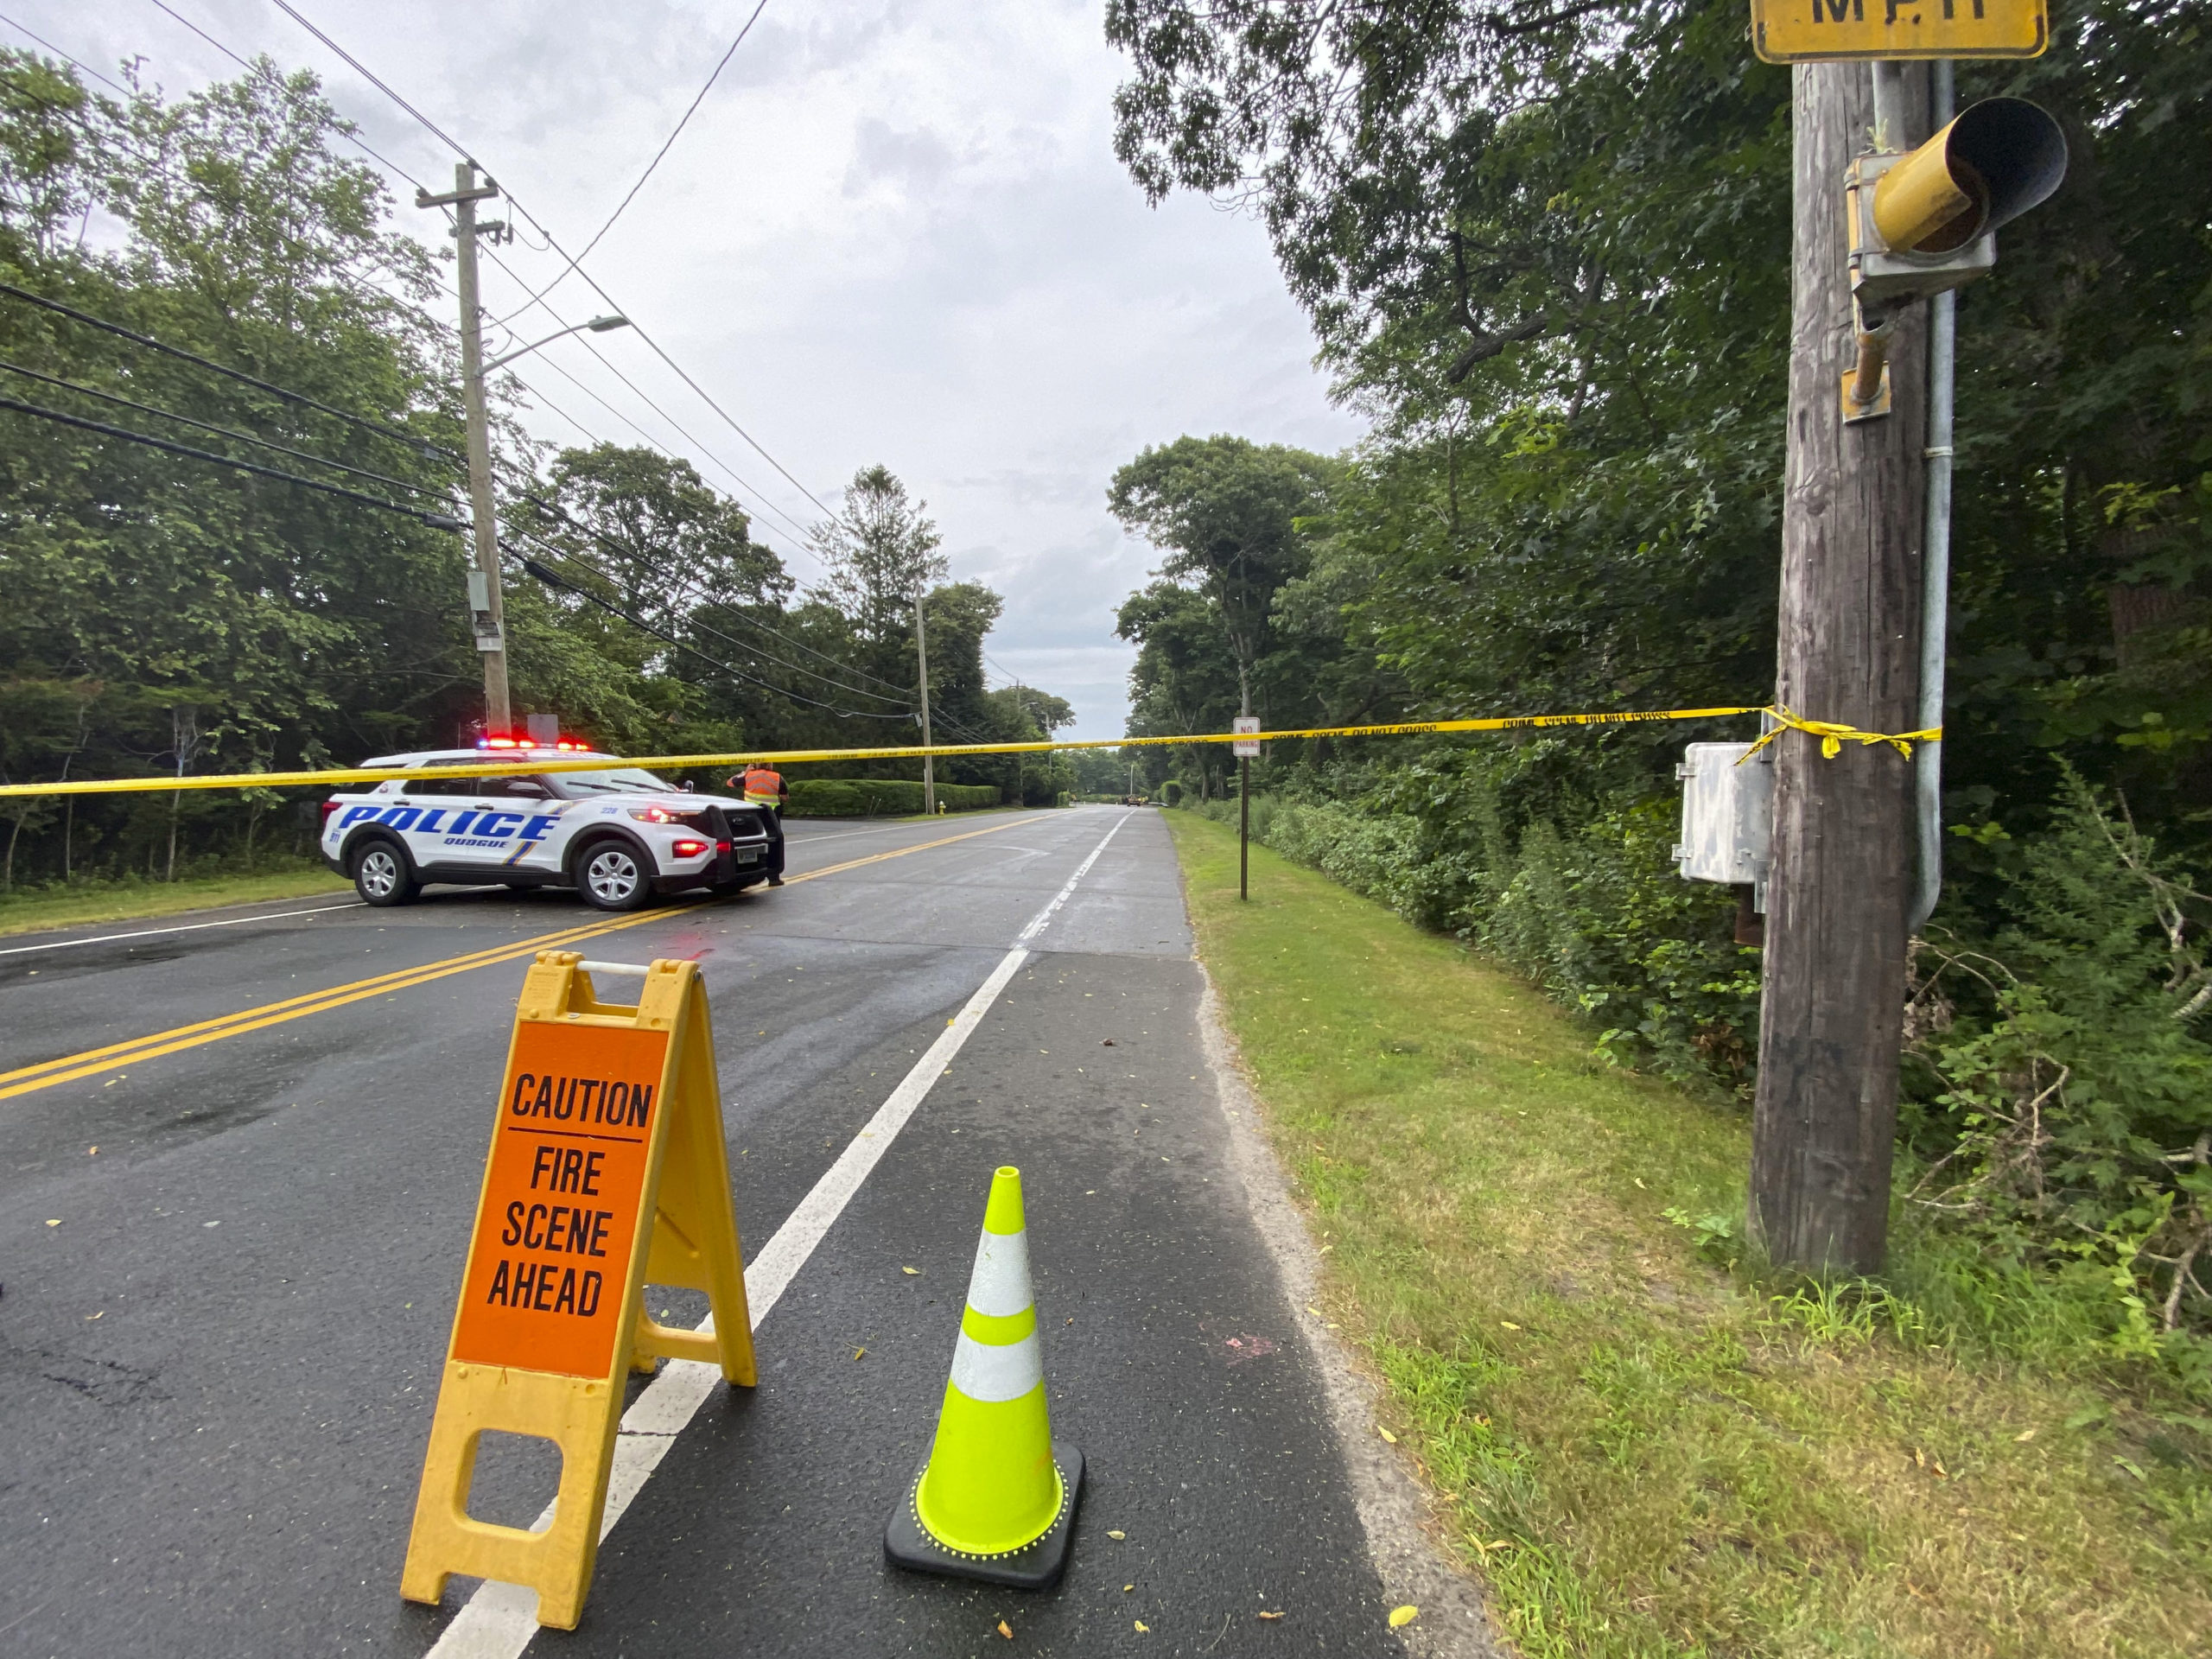 The family of victims of the July fatal crash are suing Suffolk County for failure to properly maintain and improve CR 80.  Above, the scene of head-on collision that killed five in Quogue during the ensuing investigation.